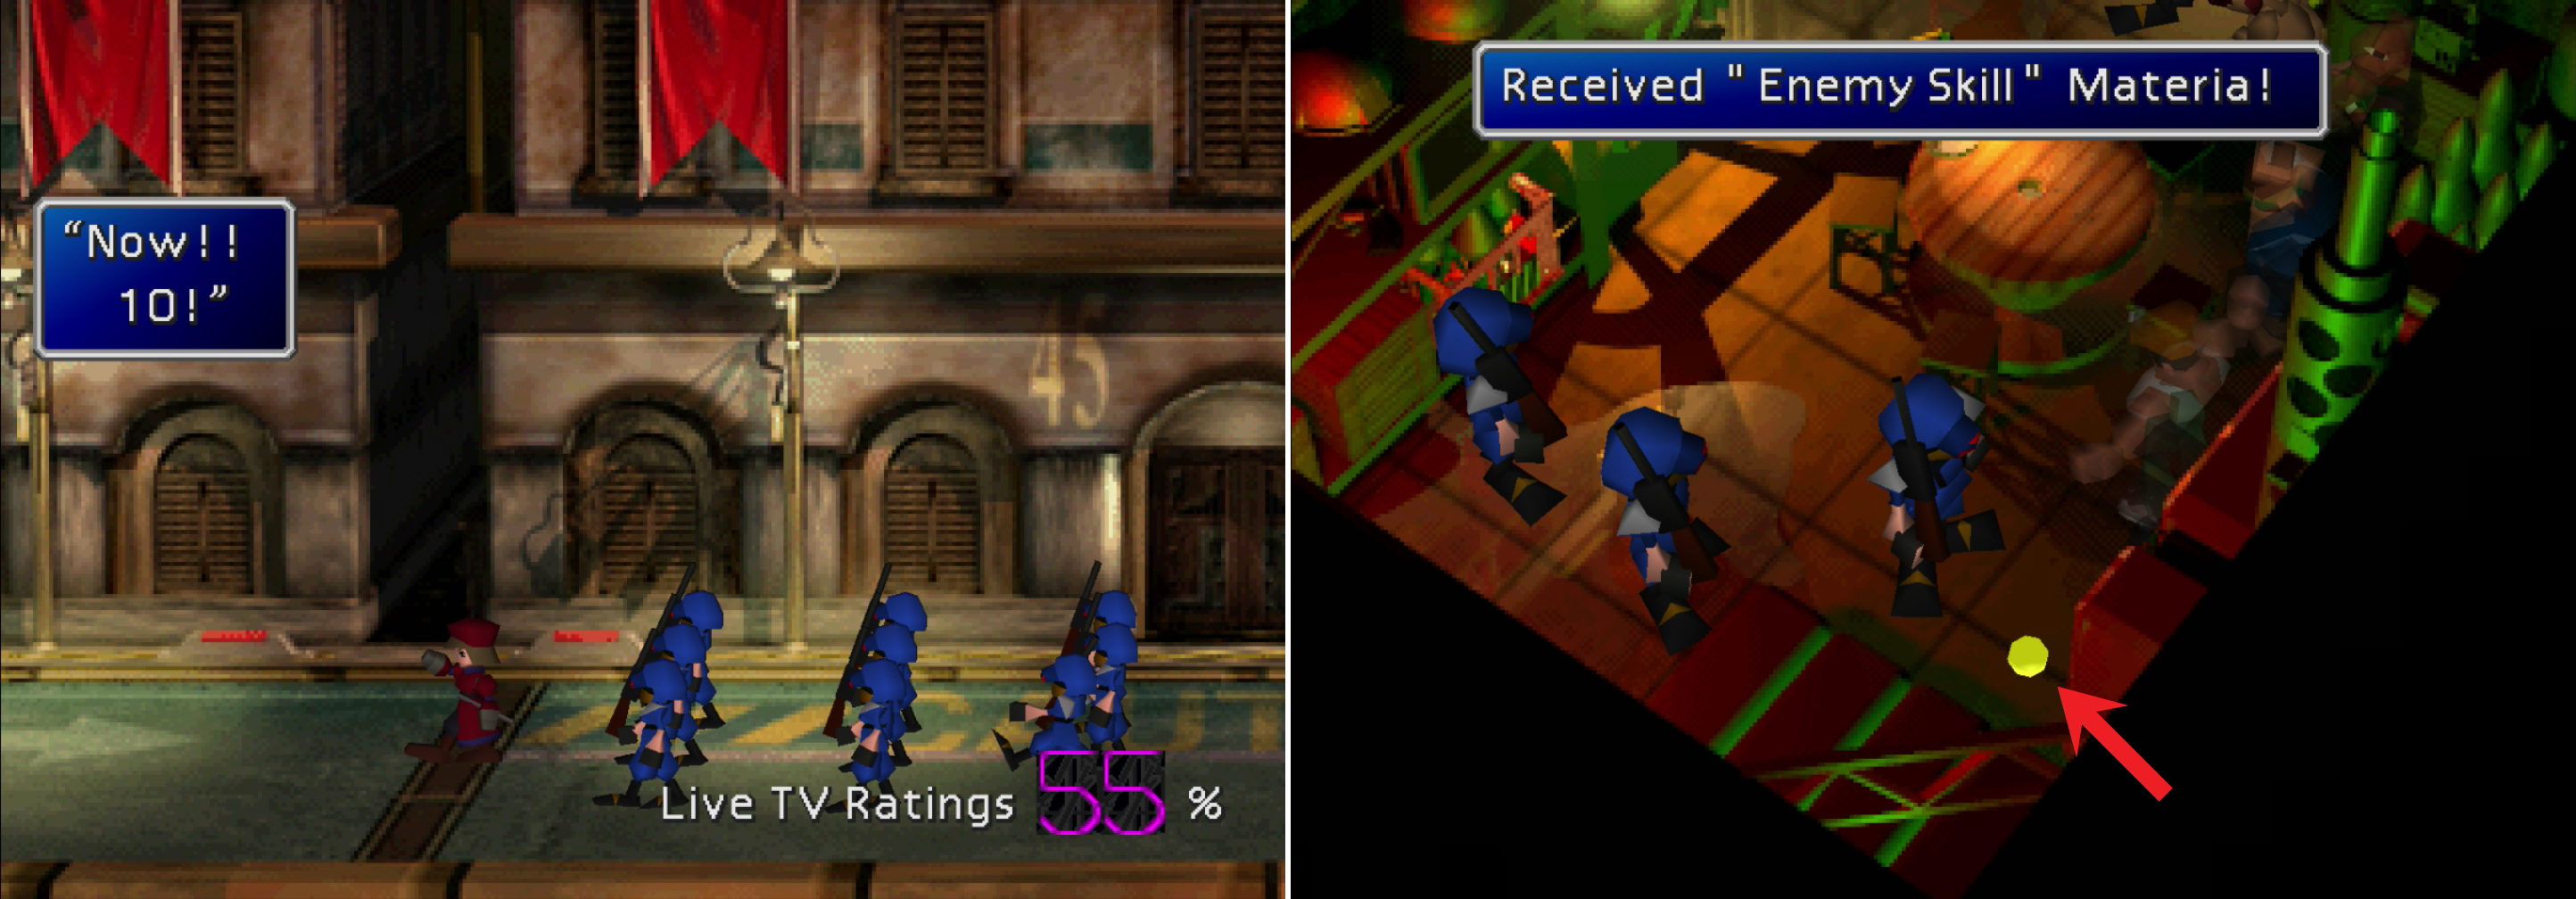 Put on a good show at the parade to get a present from the network (left). Be sure to grab the Enemy Skill Materia in the training area (right).